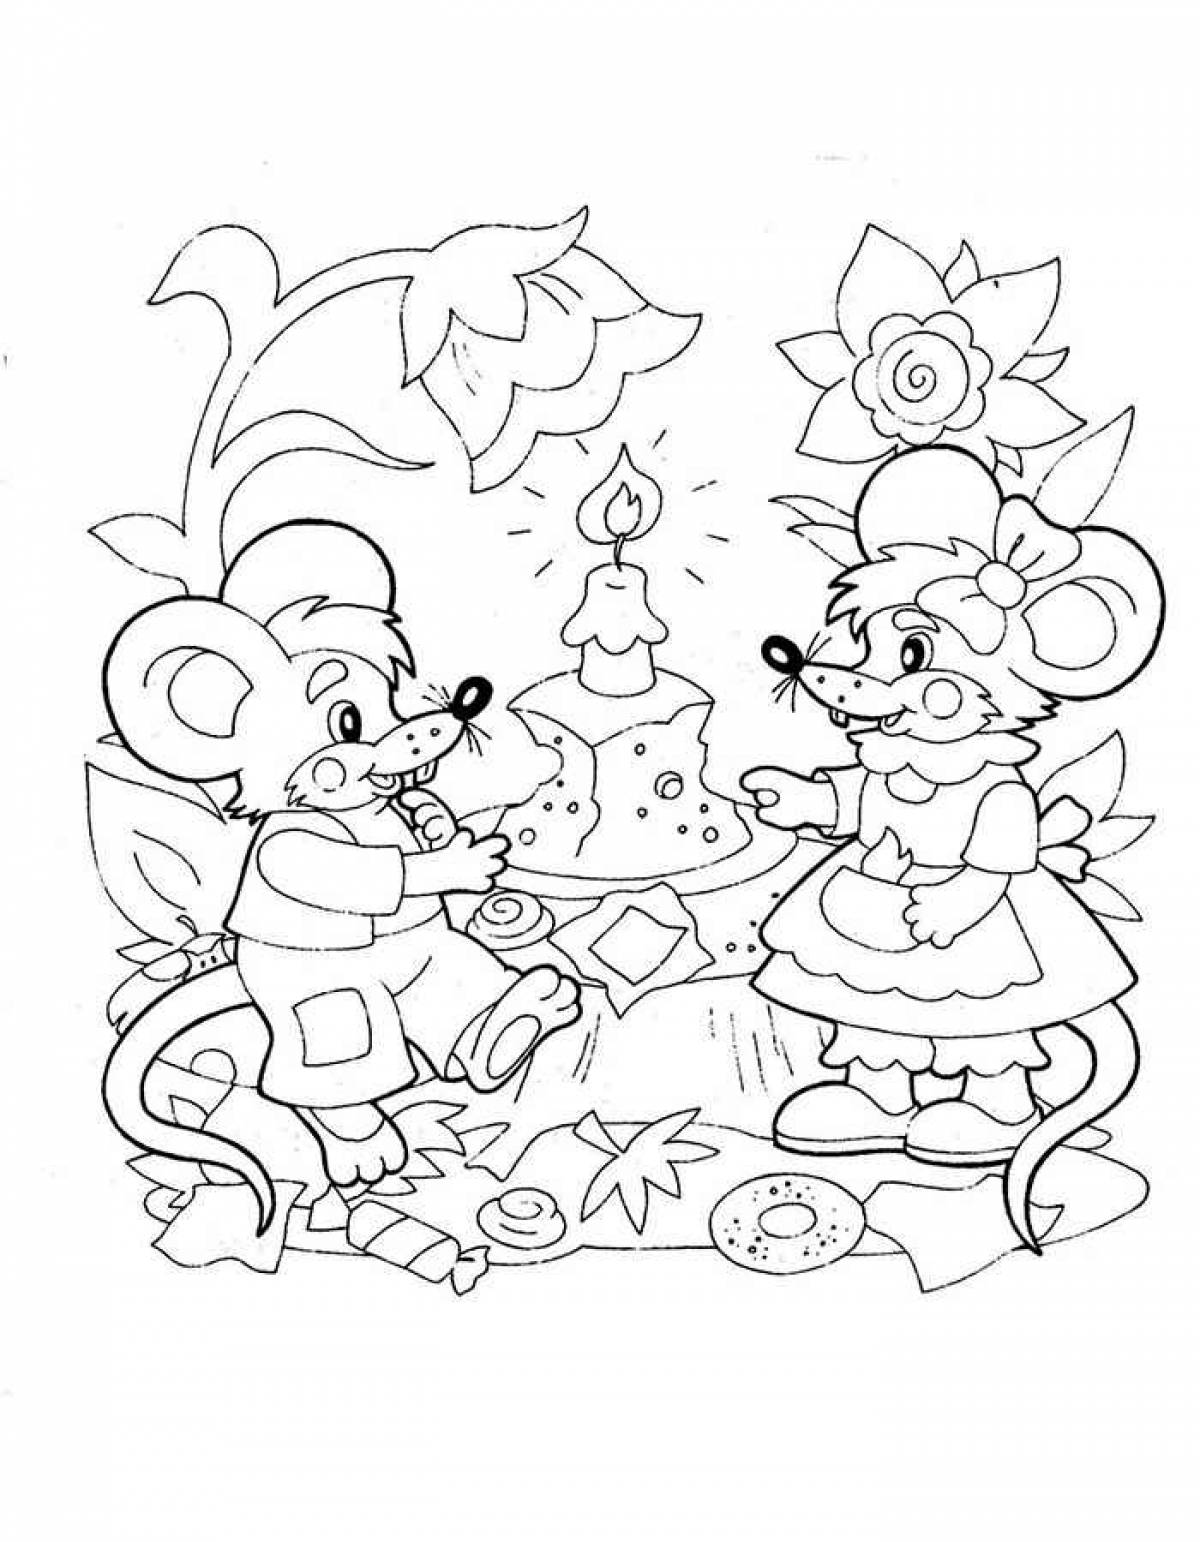 Coloring pages for children